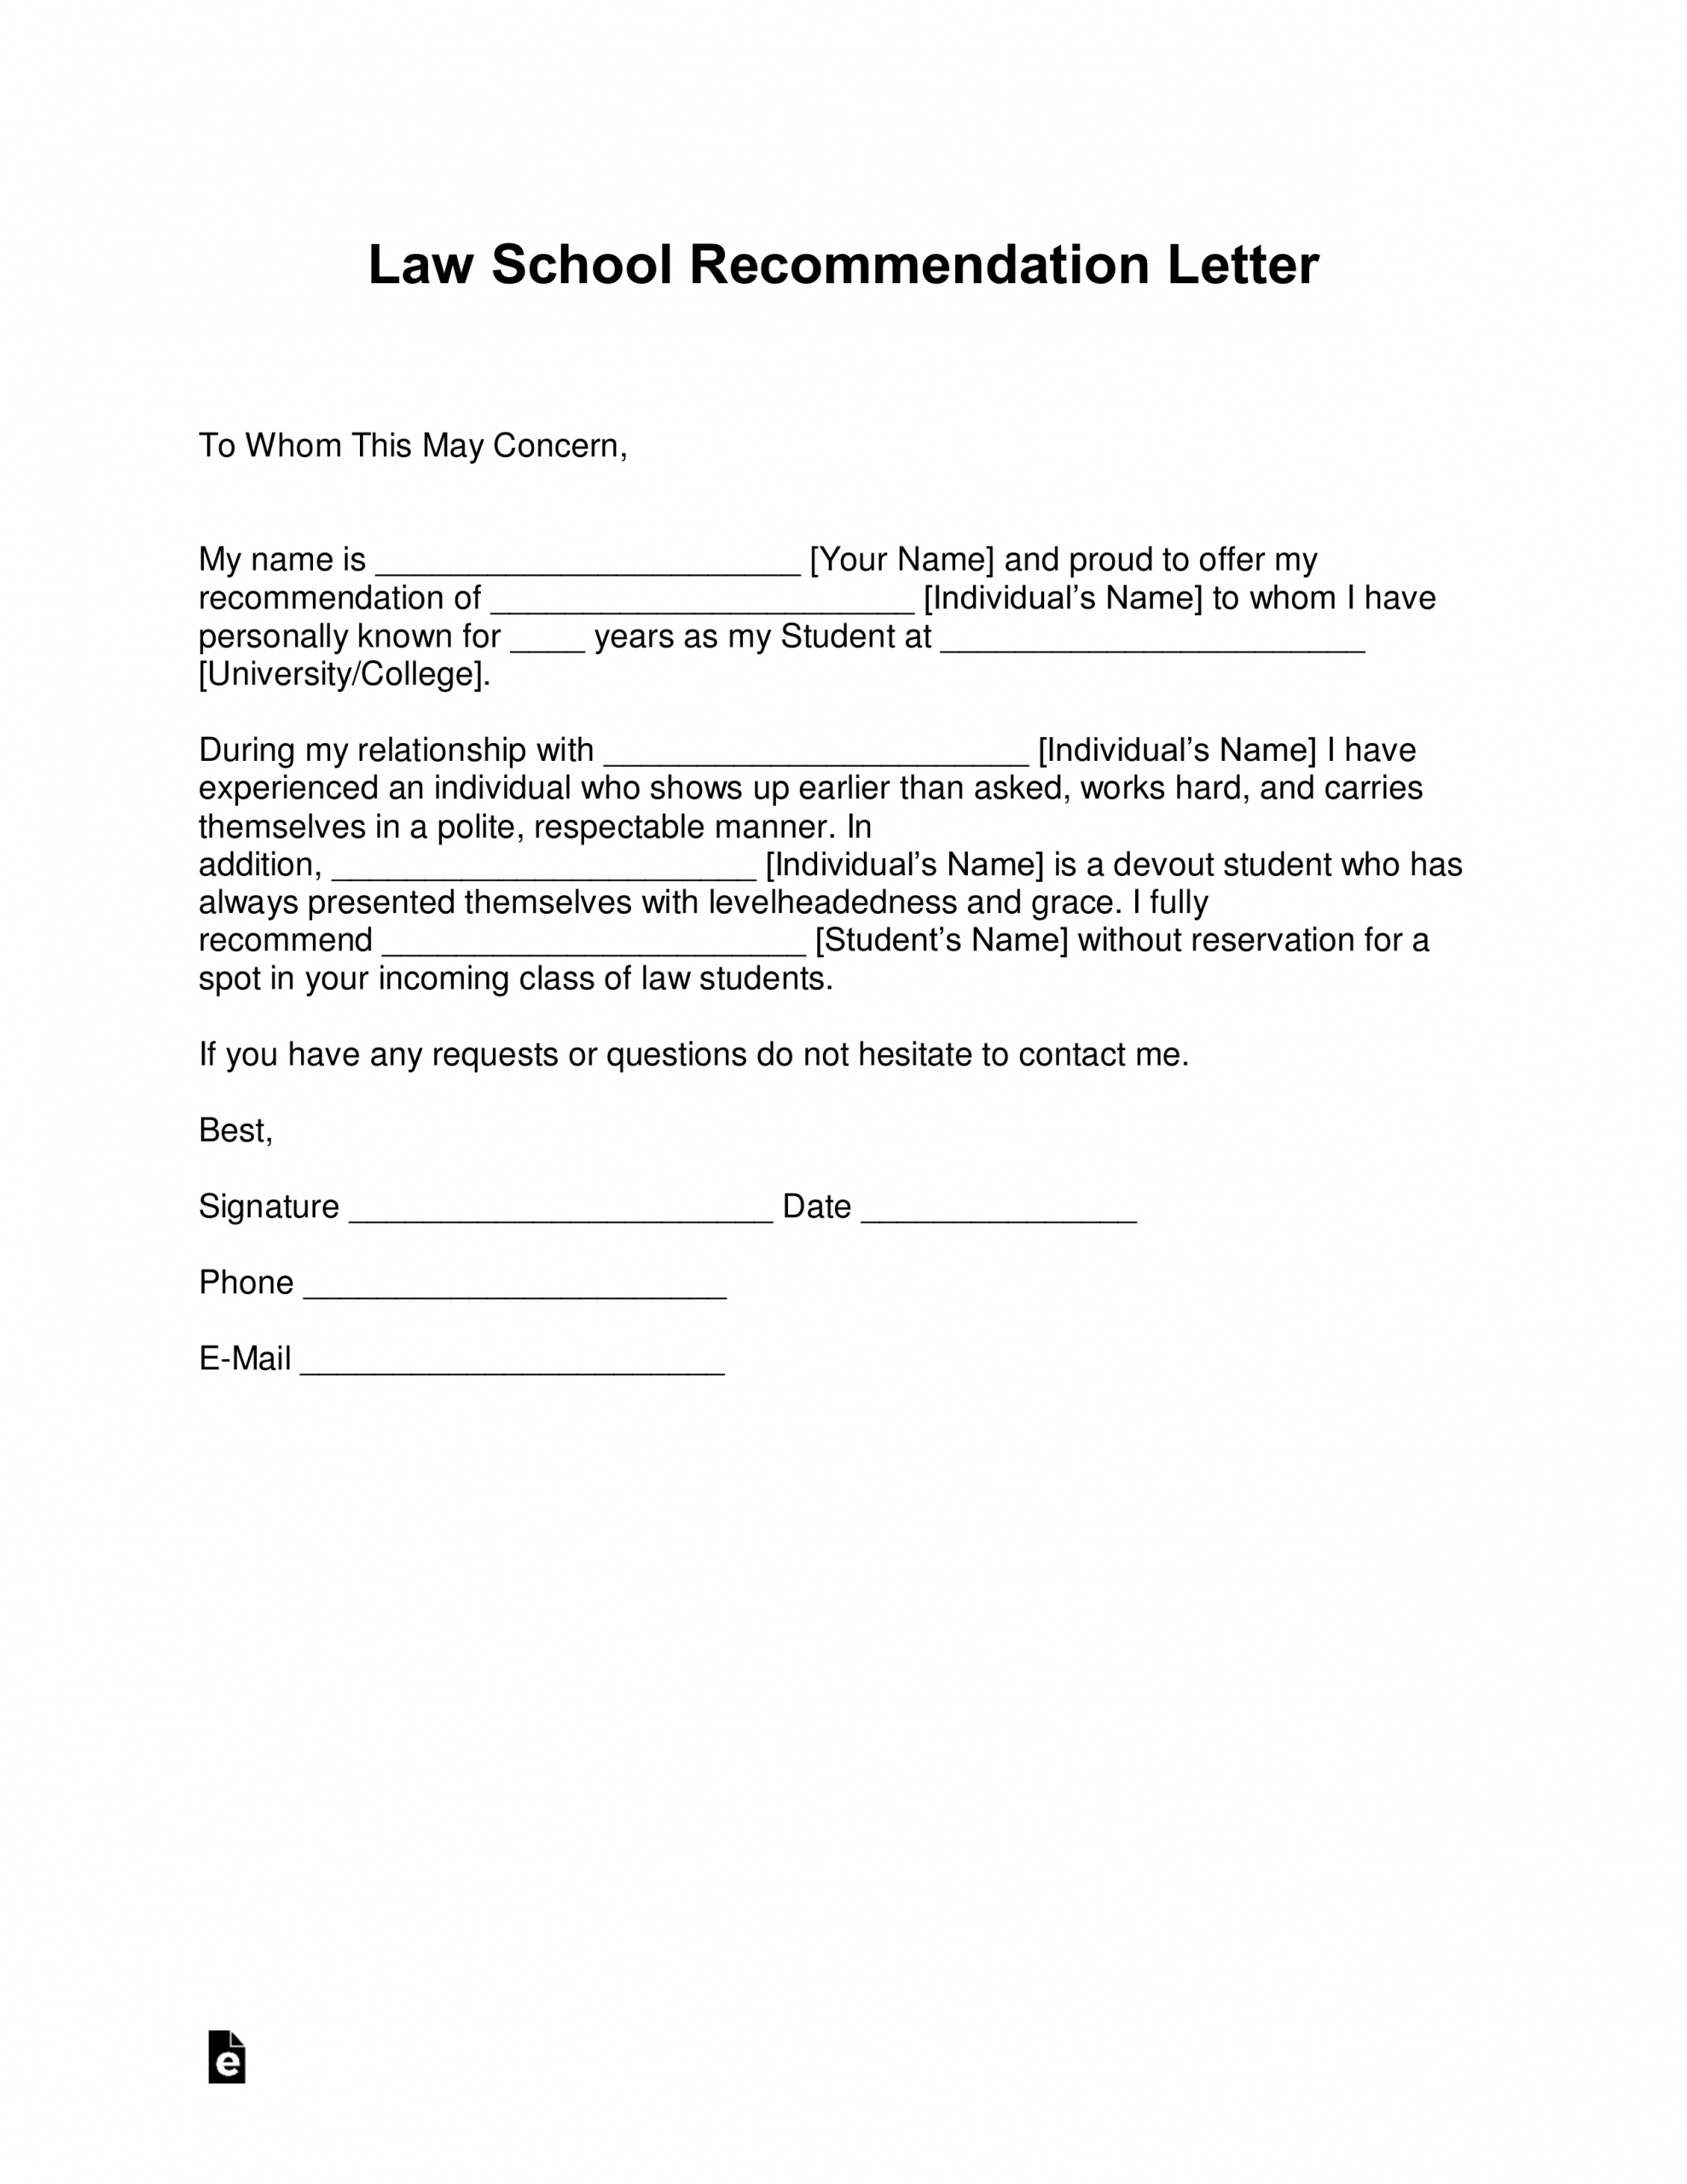 Free Law School Recommendation Letter Templates With in size 2550 X 3301